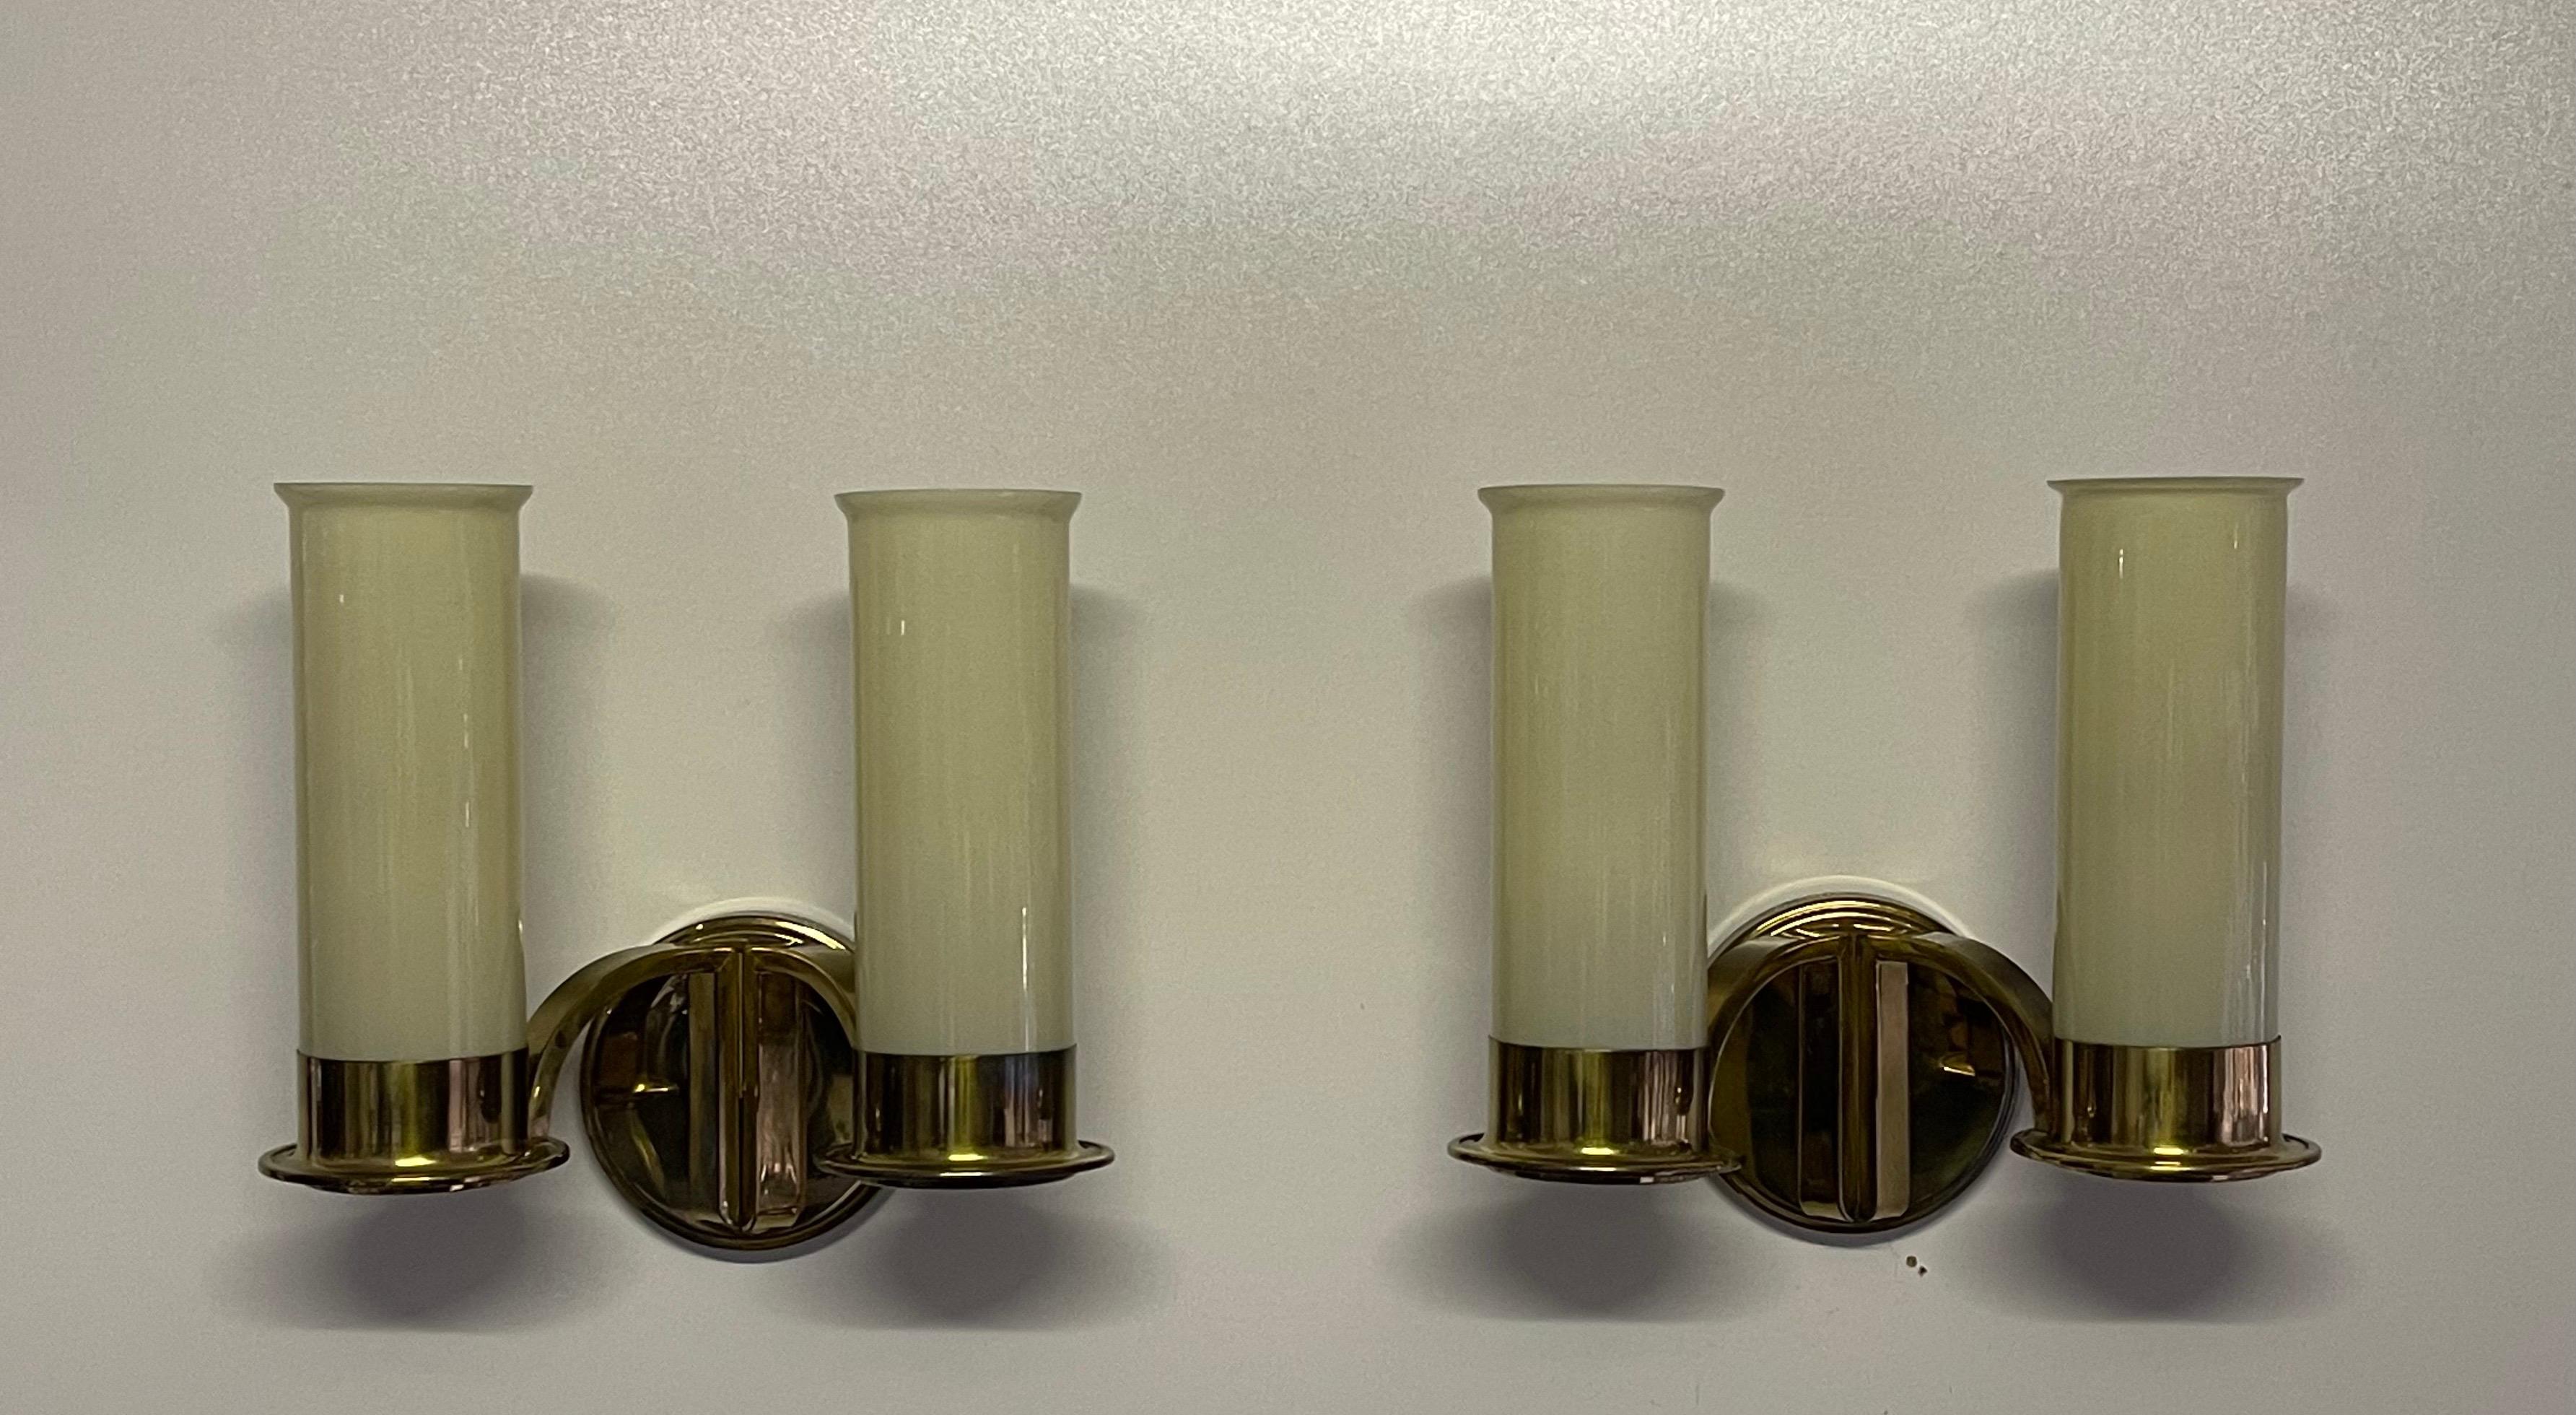 Set of Four Large Brass and Opal Glass Wall Sconces, circa 1930s For Sale 1